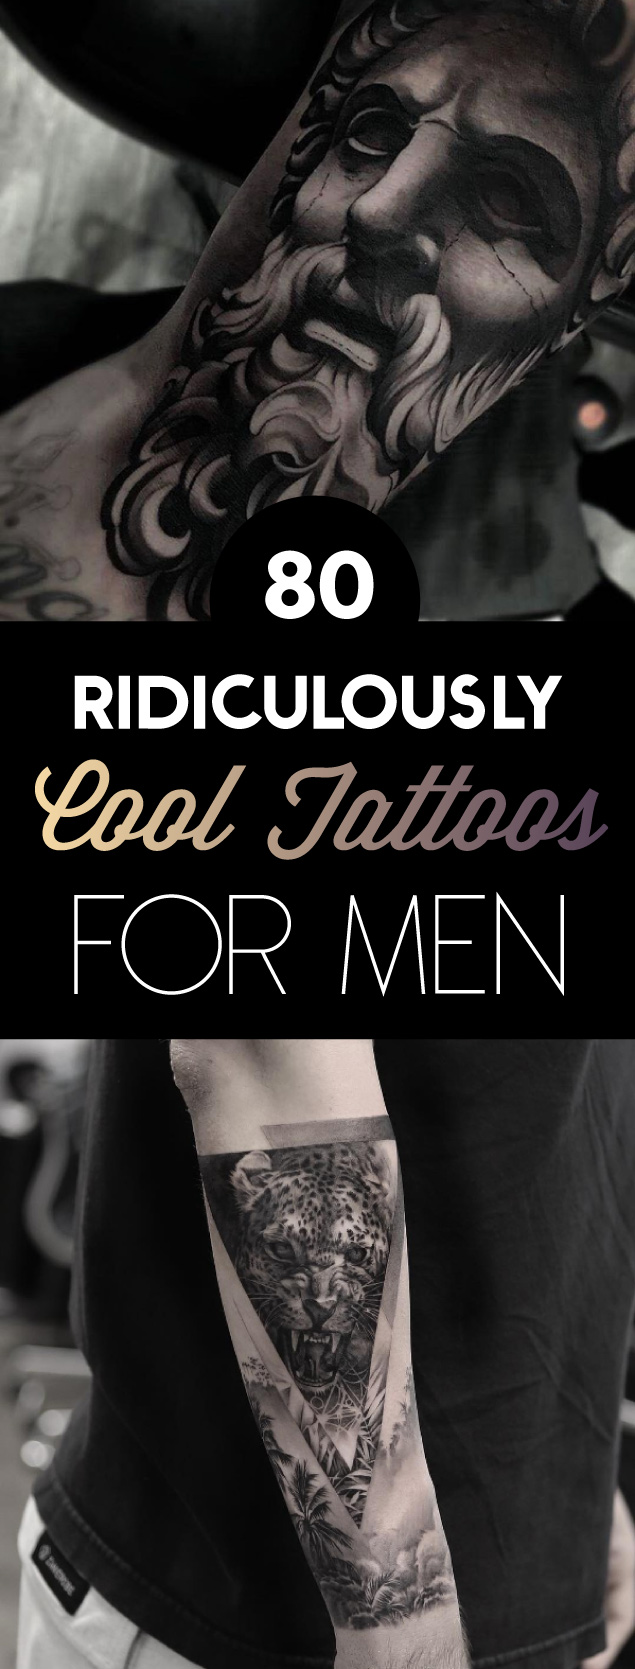 80 Ridiculously Cool Tattoos For Men